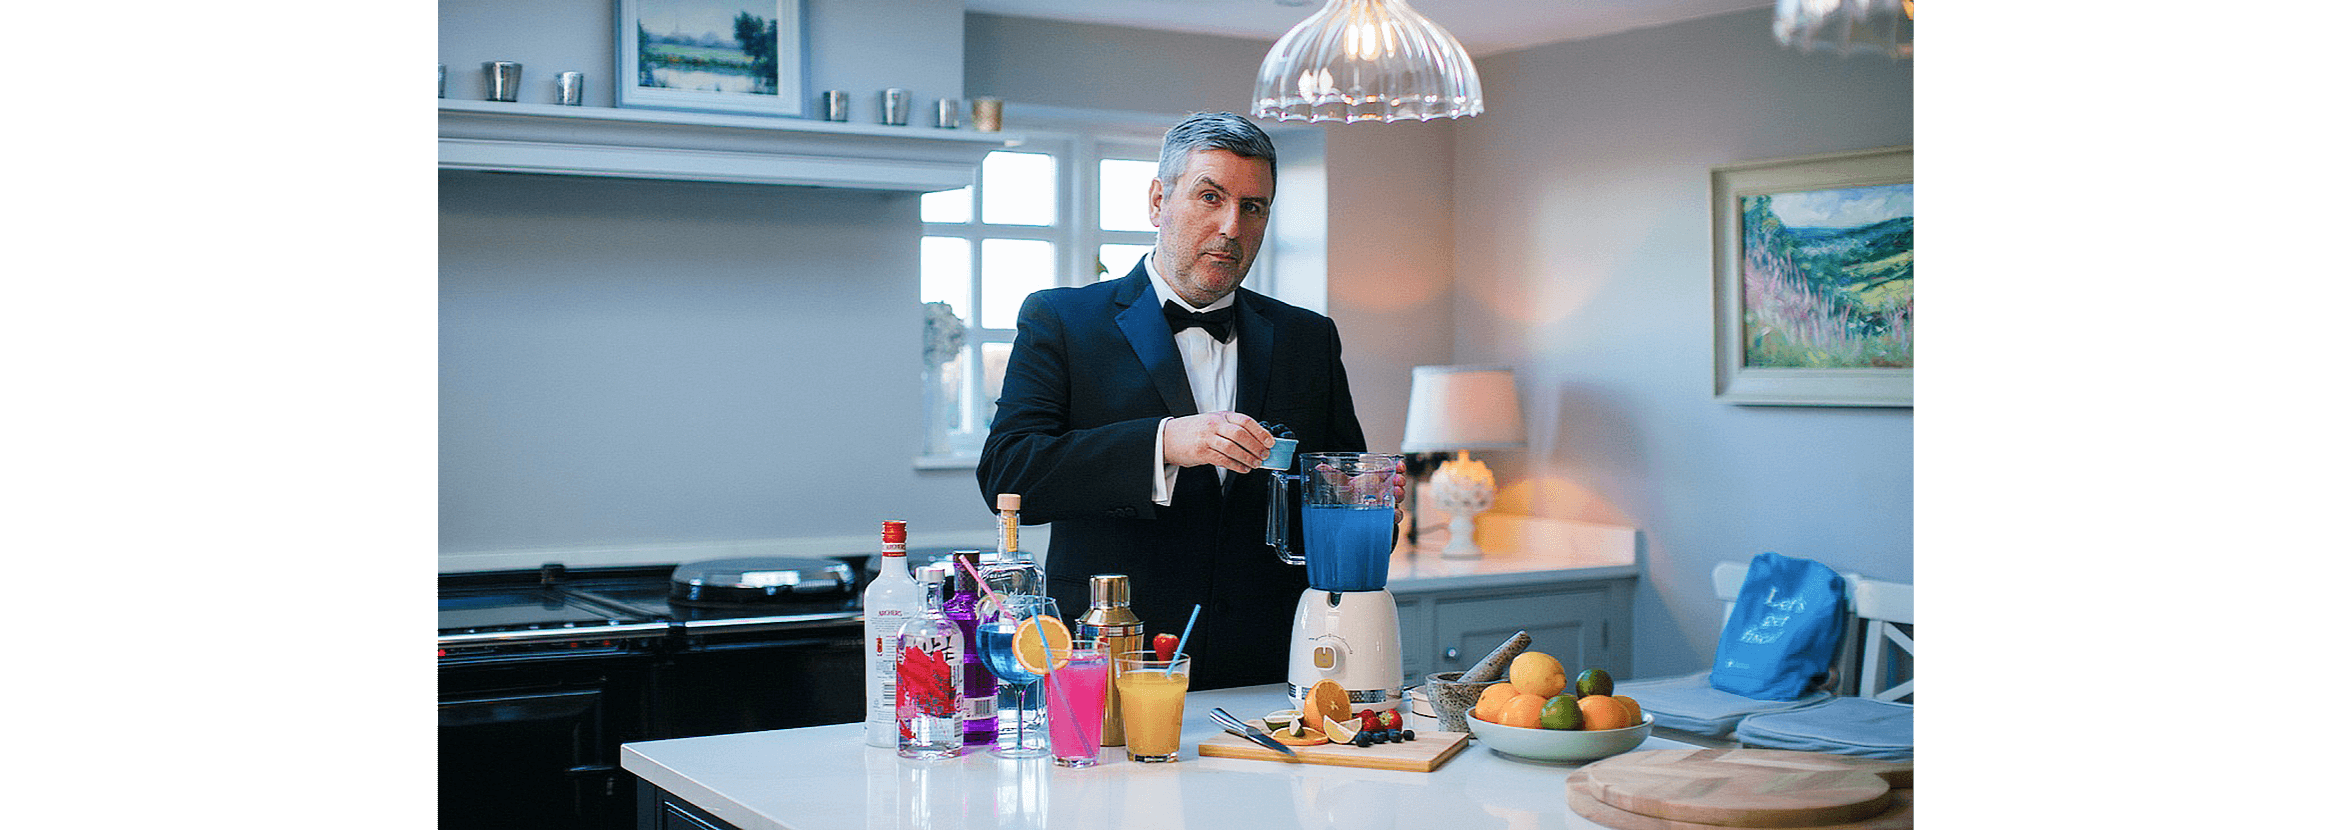 Gary Turner, Managing Director, UK and EMEA in his kitchen making  cocktails.